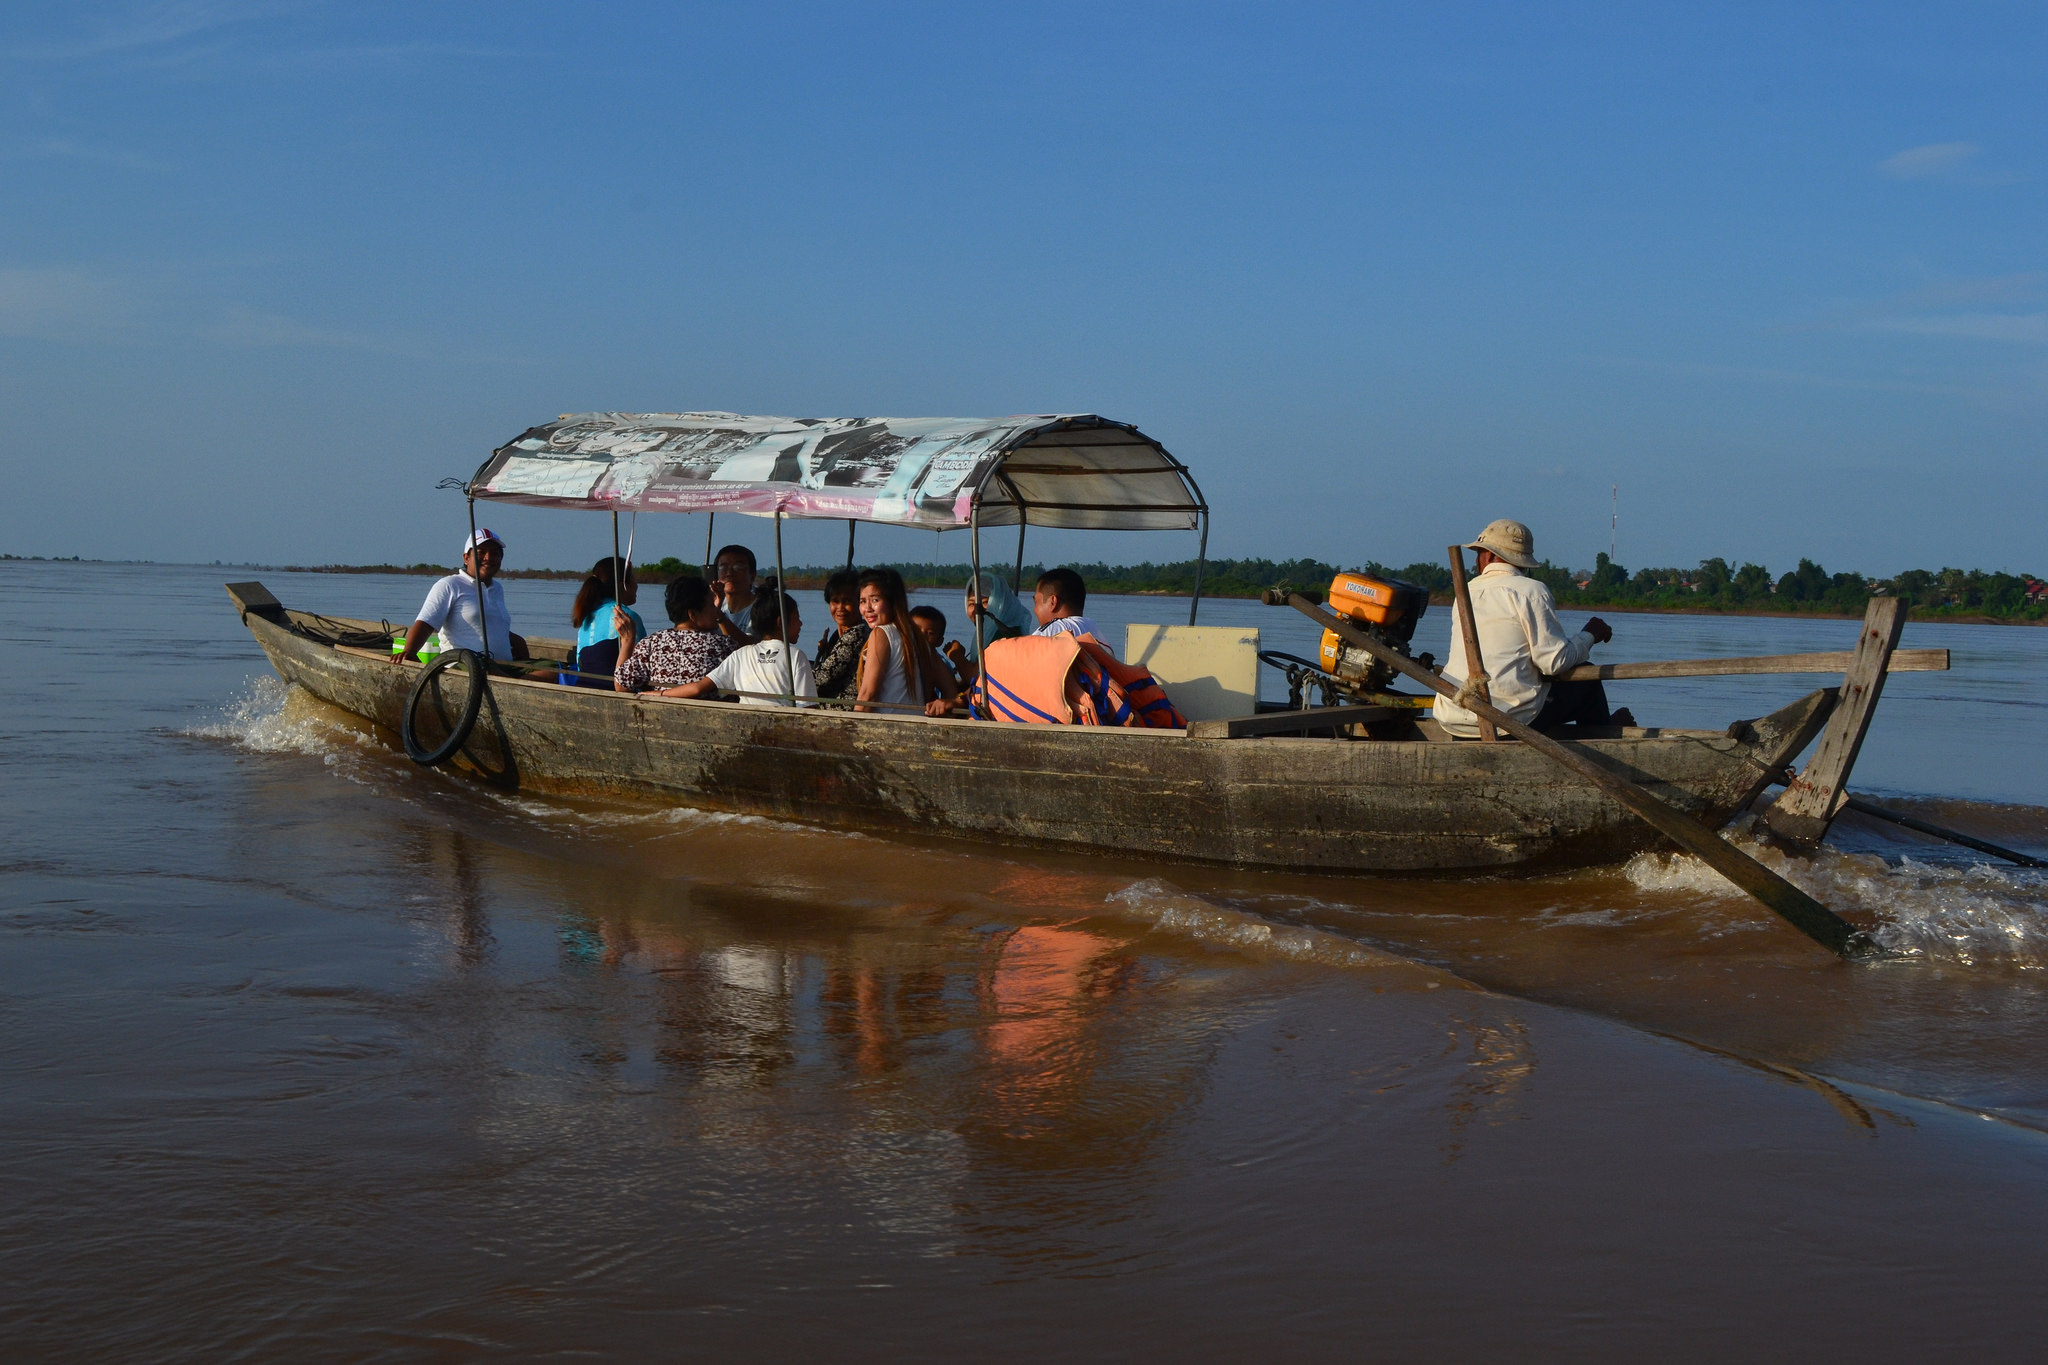 Boat on the Mekong